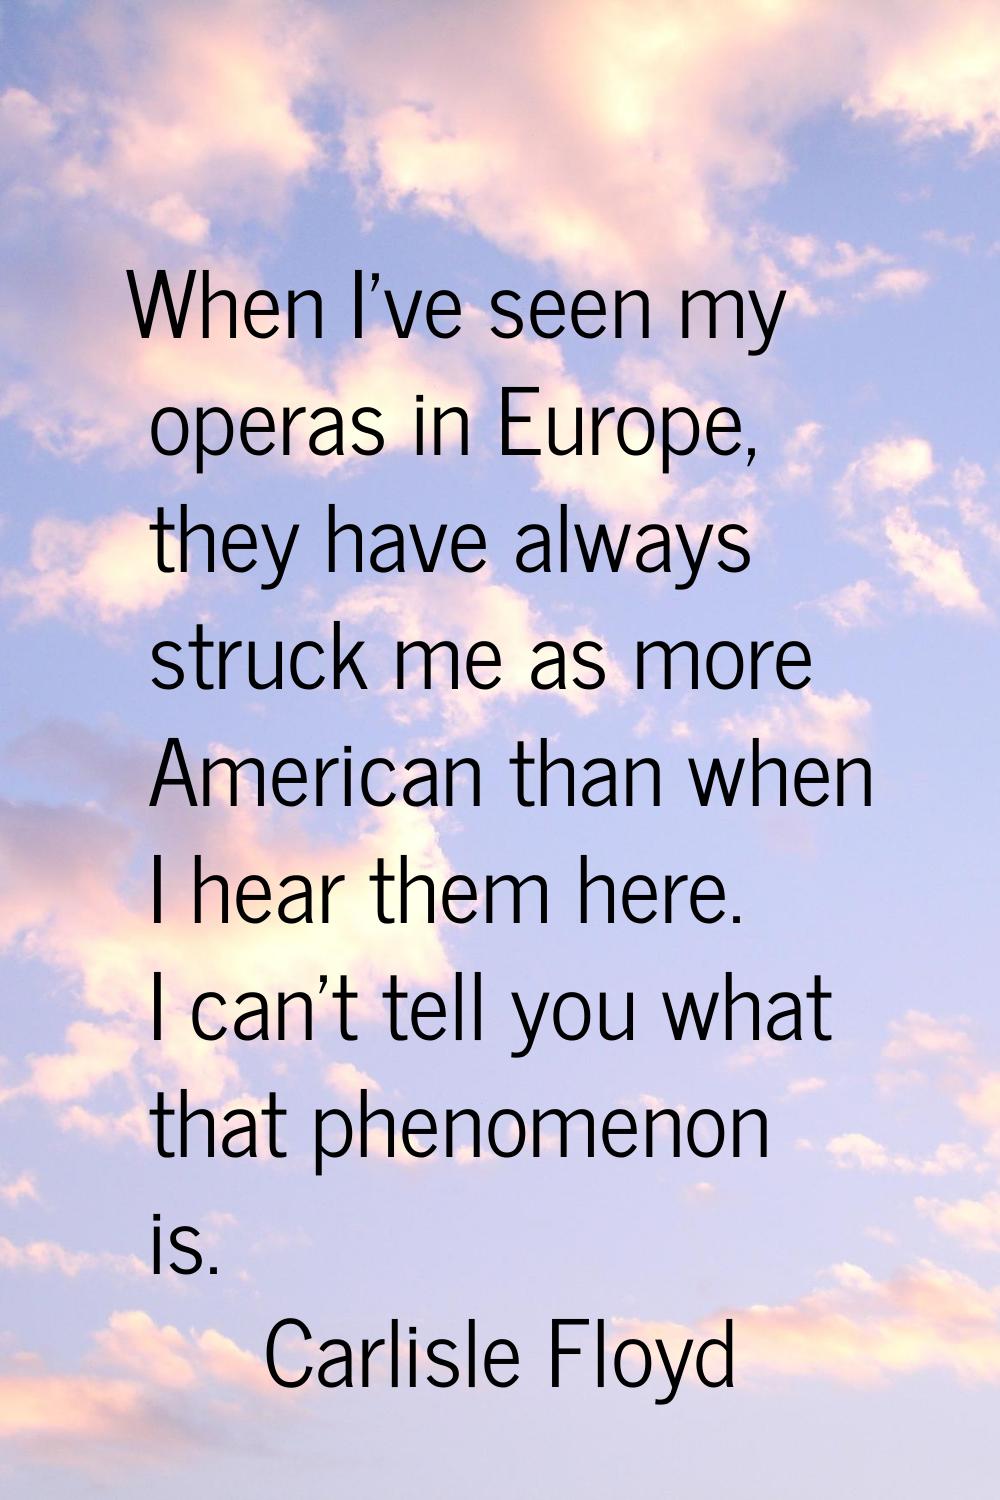 When I've seen my operas in Europe, they have always struck me as more American than when I hear th